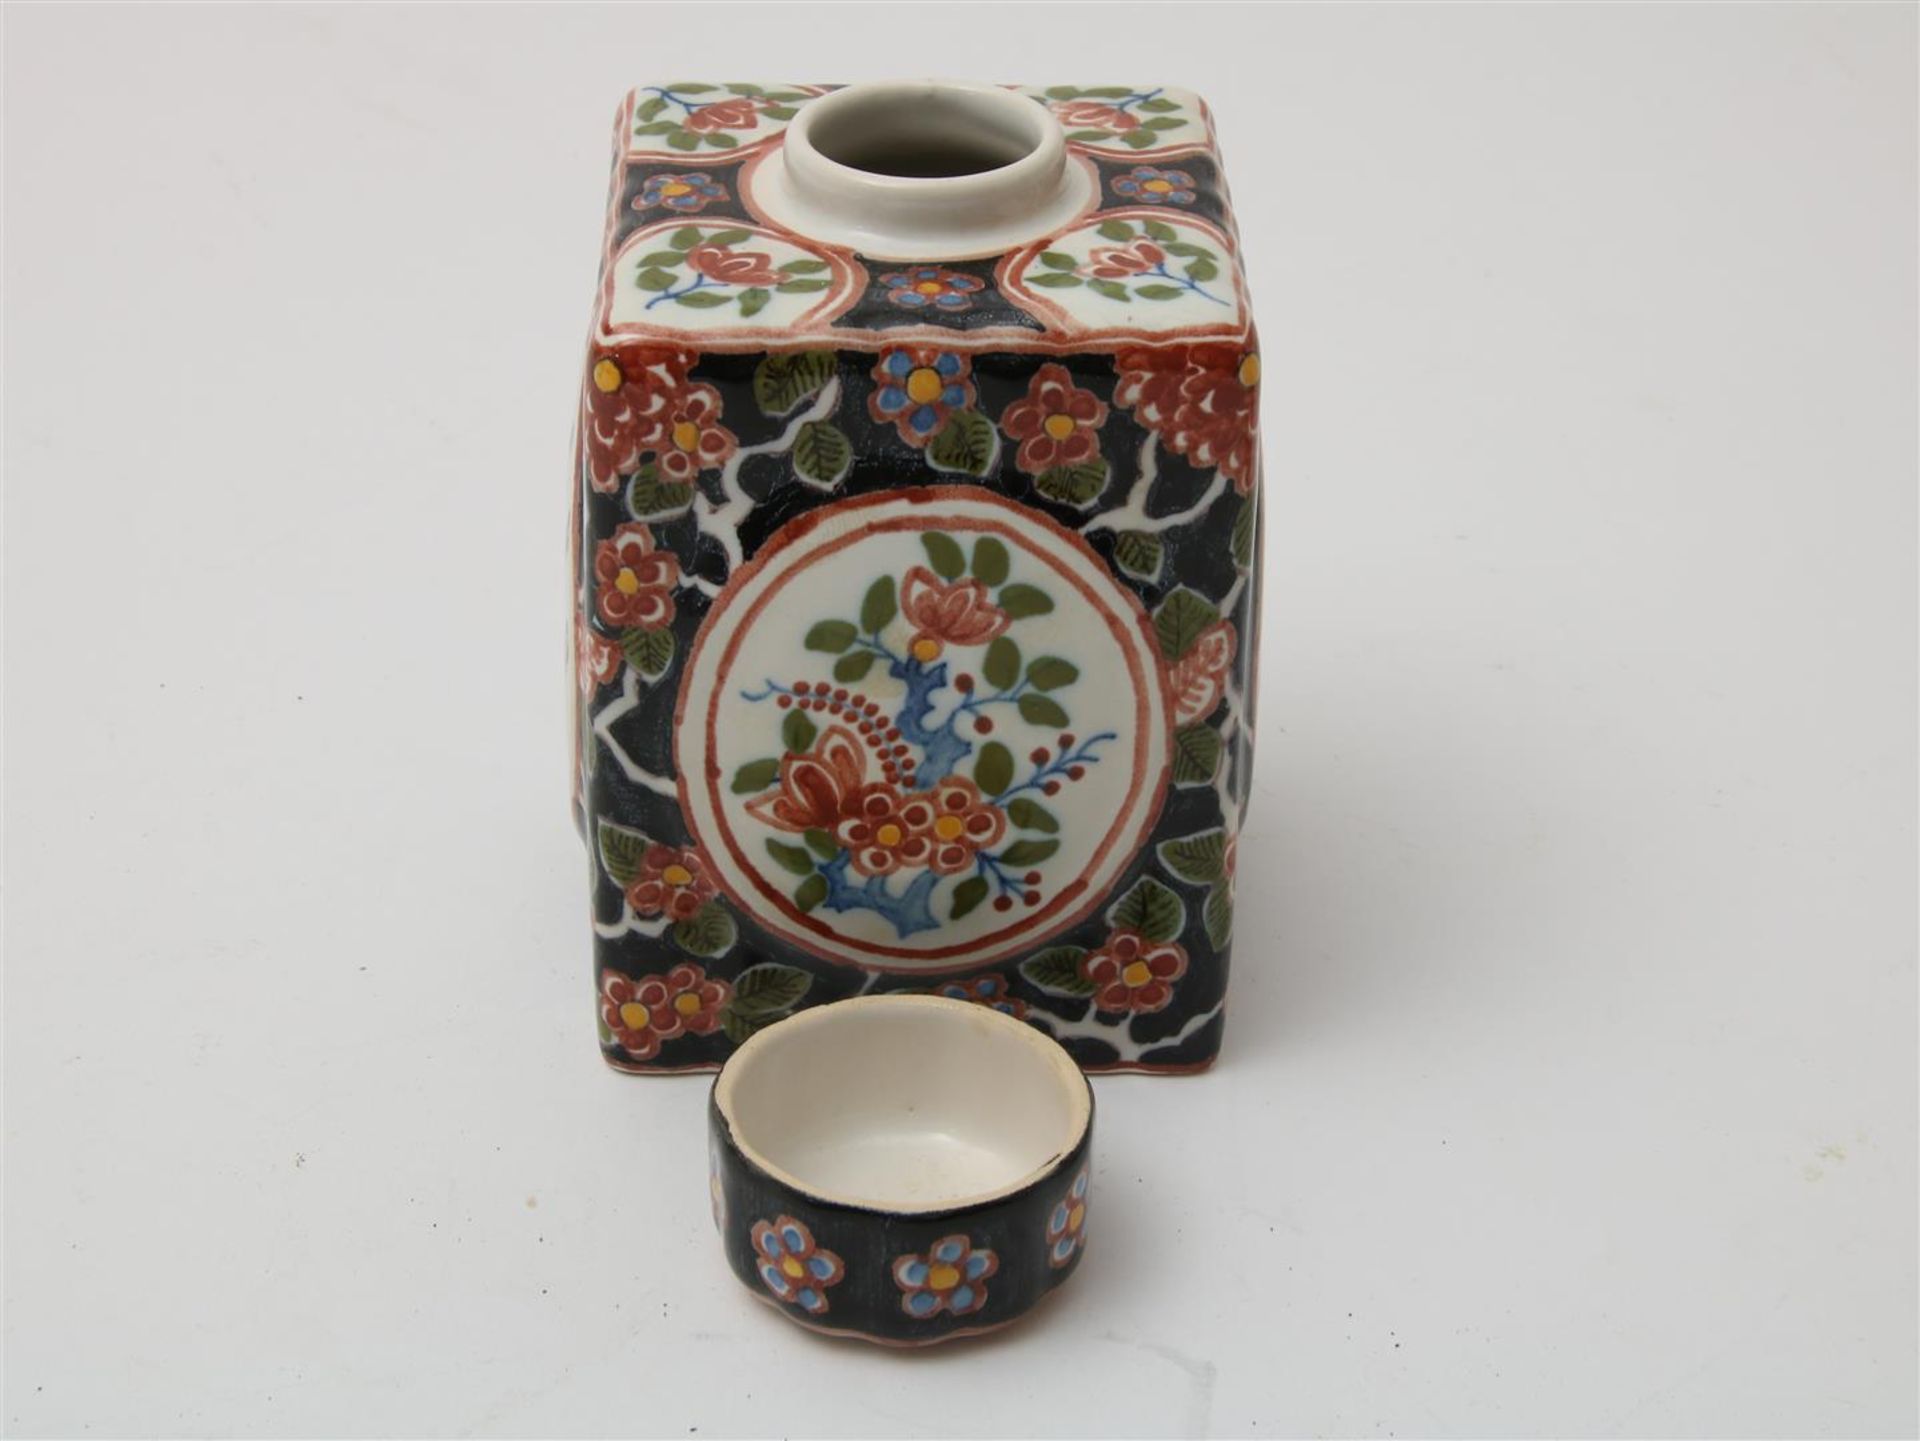 Lot of a polychrome earthenware candlestick, h. 21 cm., polychrome earthenware tea caddy, h. 13 - Image 5 of 9